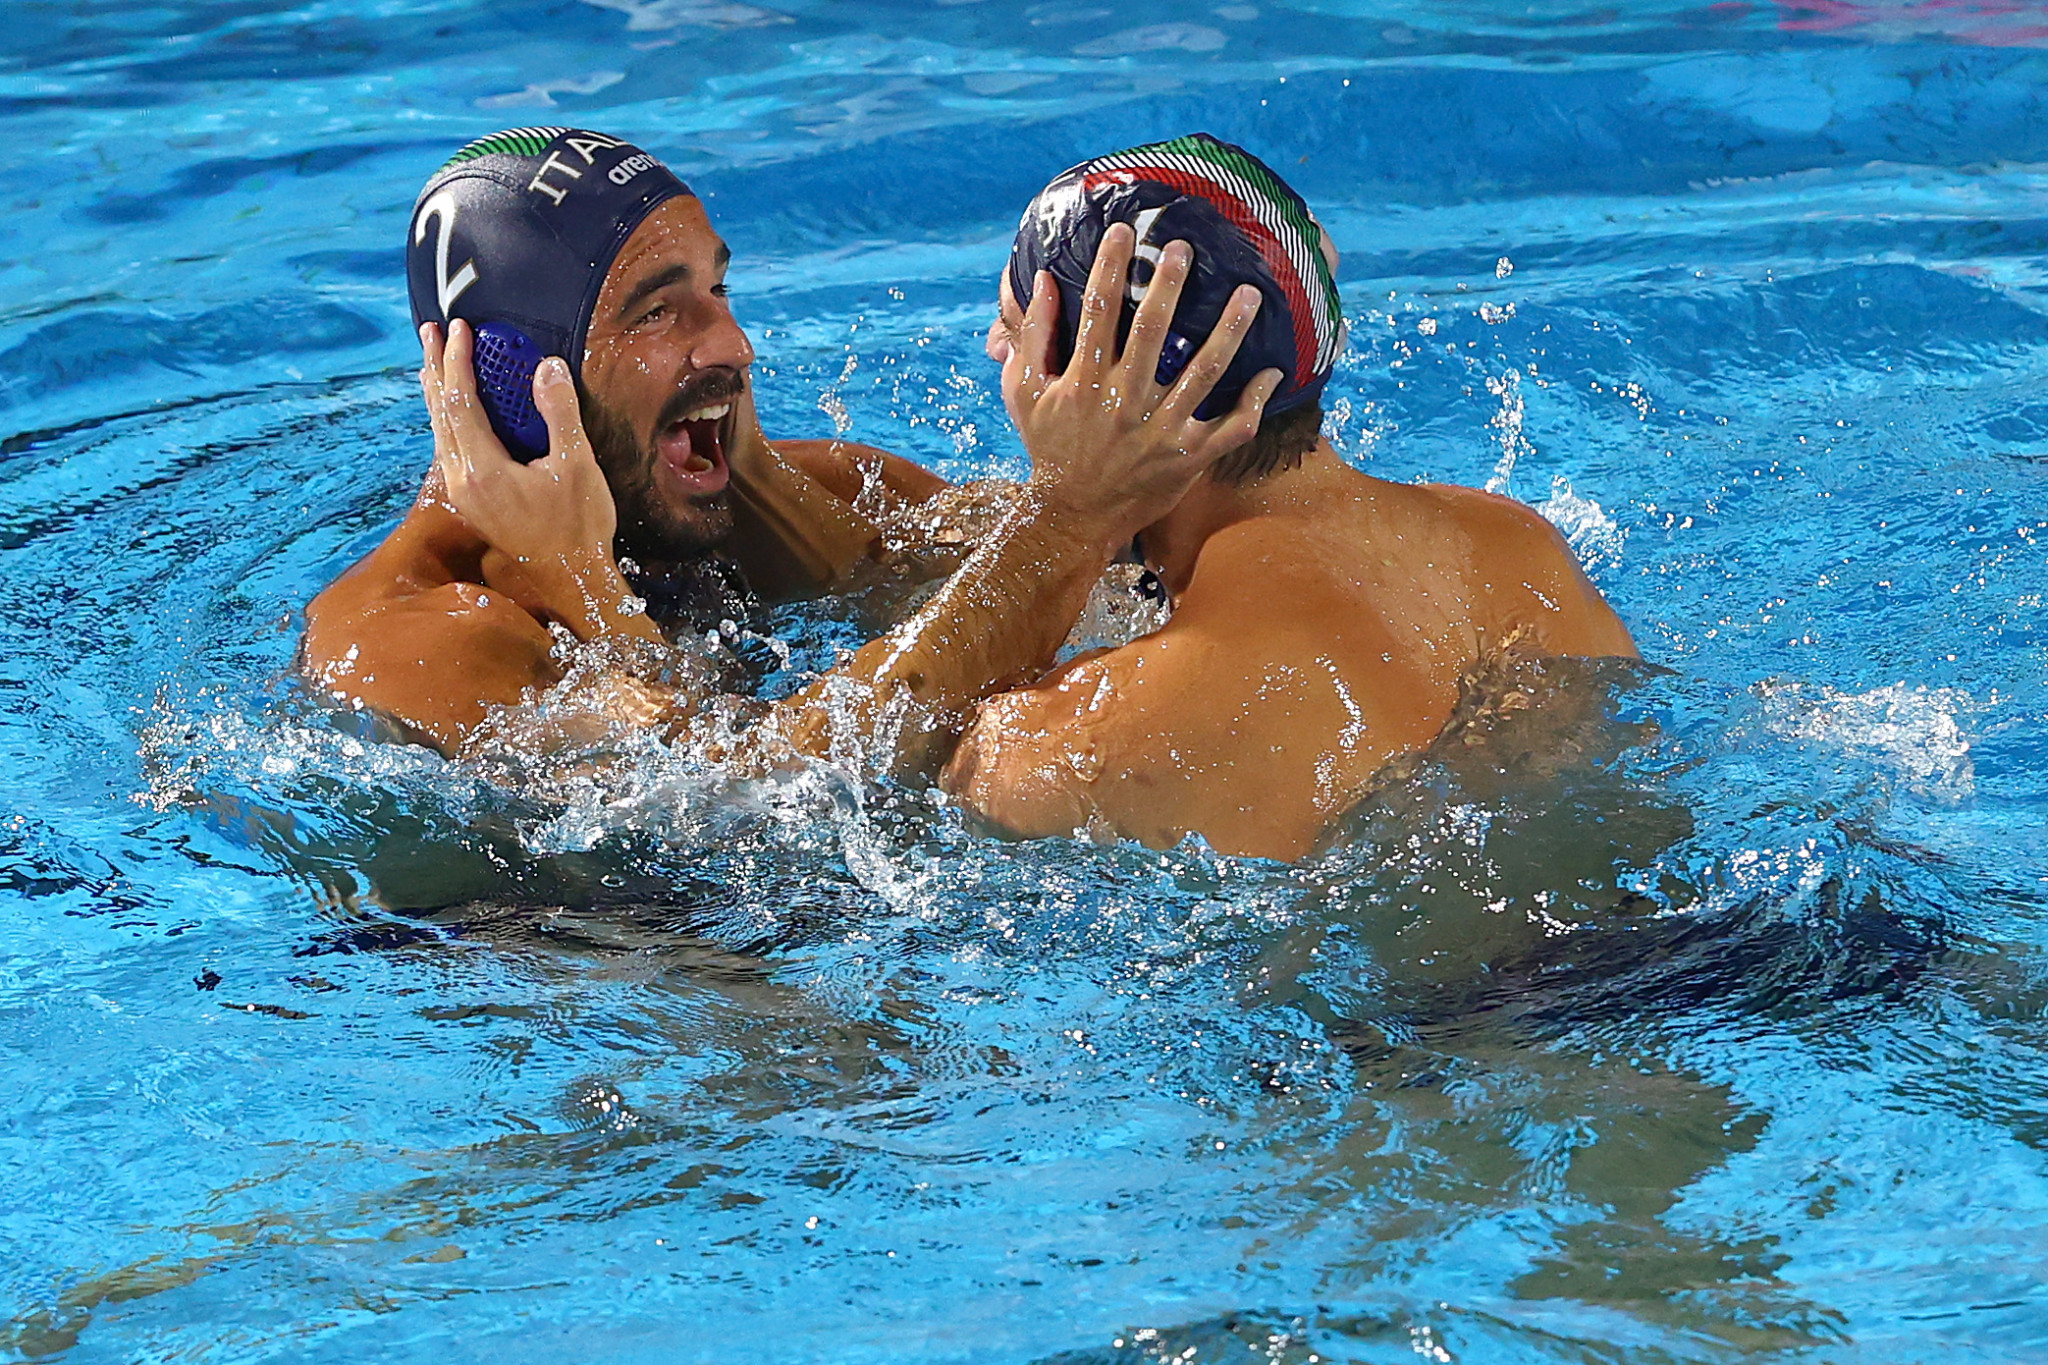 Italy beat the US 13-9 to win the Men's Water Polo World League ©Getty Images